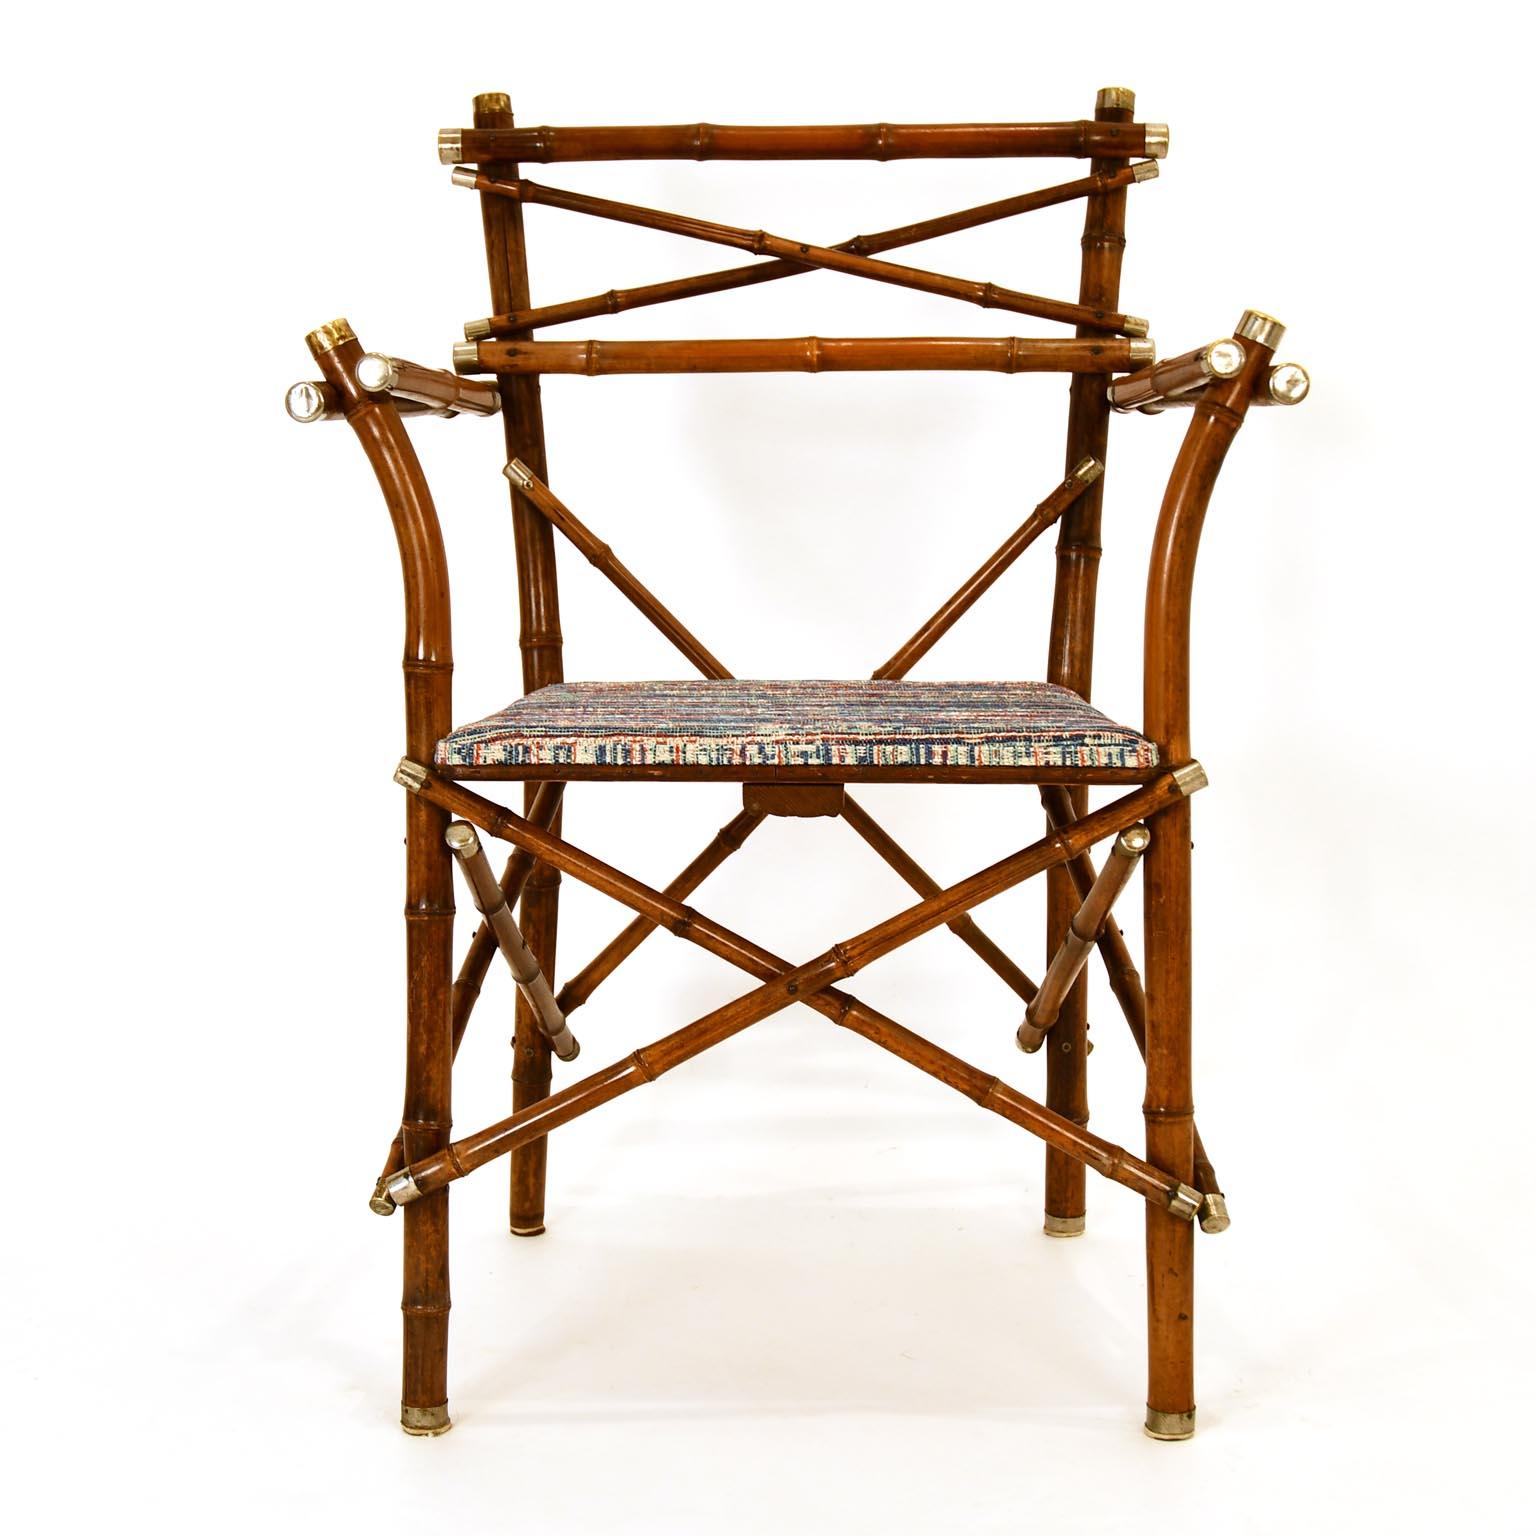 A decorative pair of bamboo armchair which was made in Vienna circa 1920 by J. Kothgassner - Bambus & Phantasie-Möbel, Gumpendorferstrasse 57.
The end of the bamboo rods have a nickel plated brass cup. One chair has 3 missing cups at the feet, the